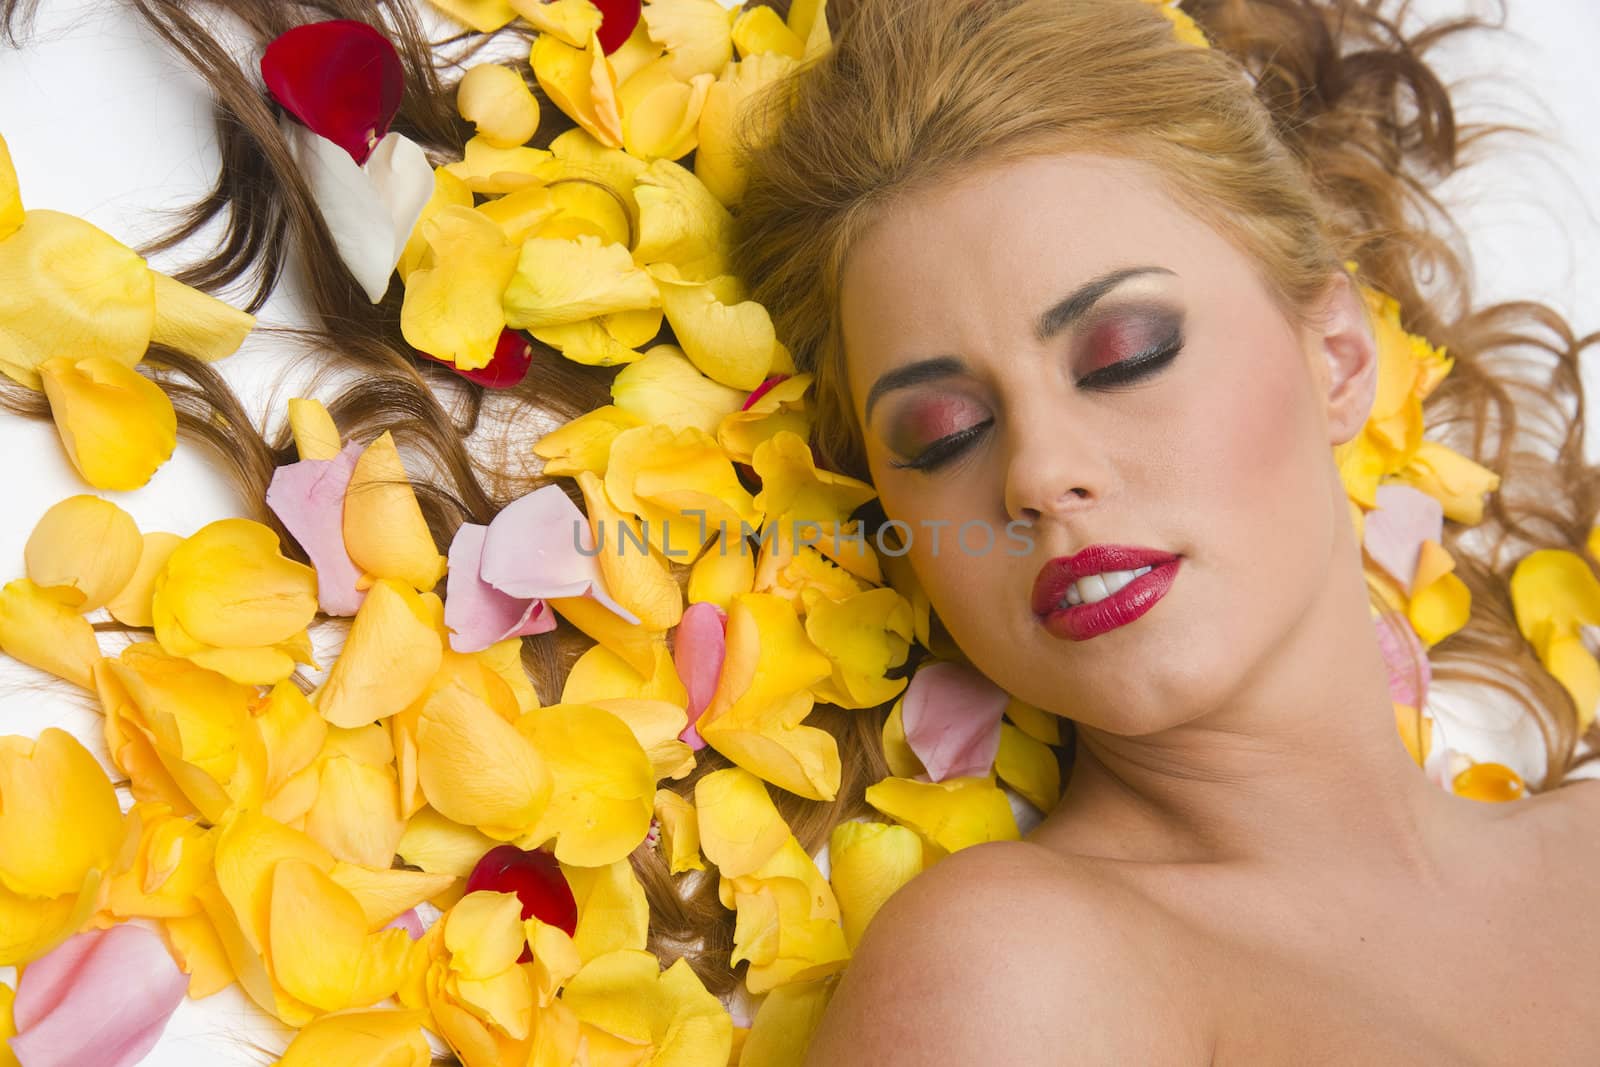 Rest in Flower Petals by ChrisBoswell